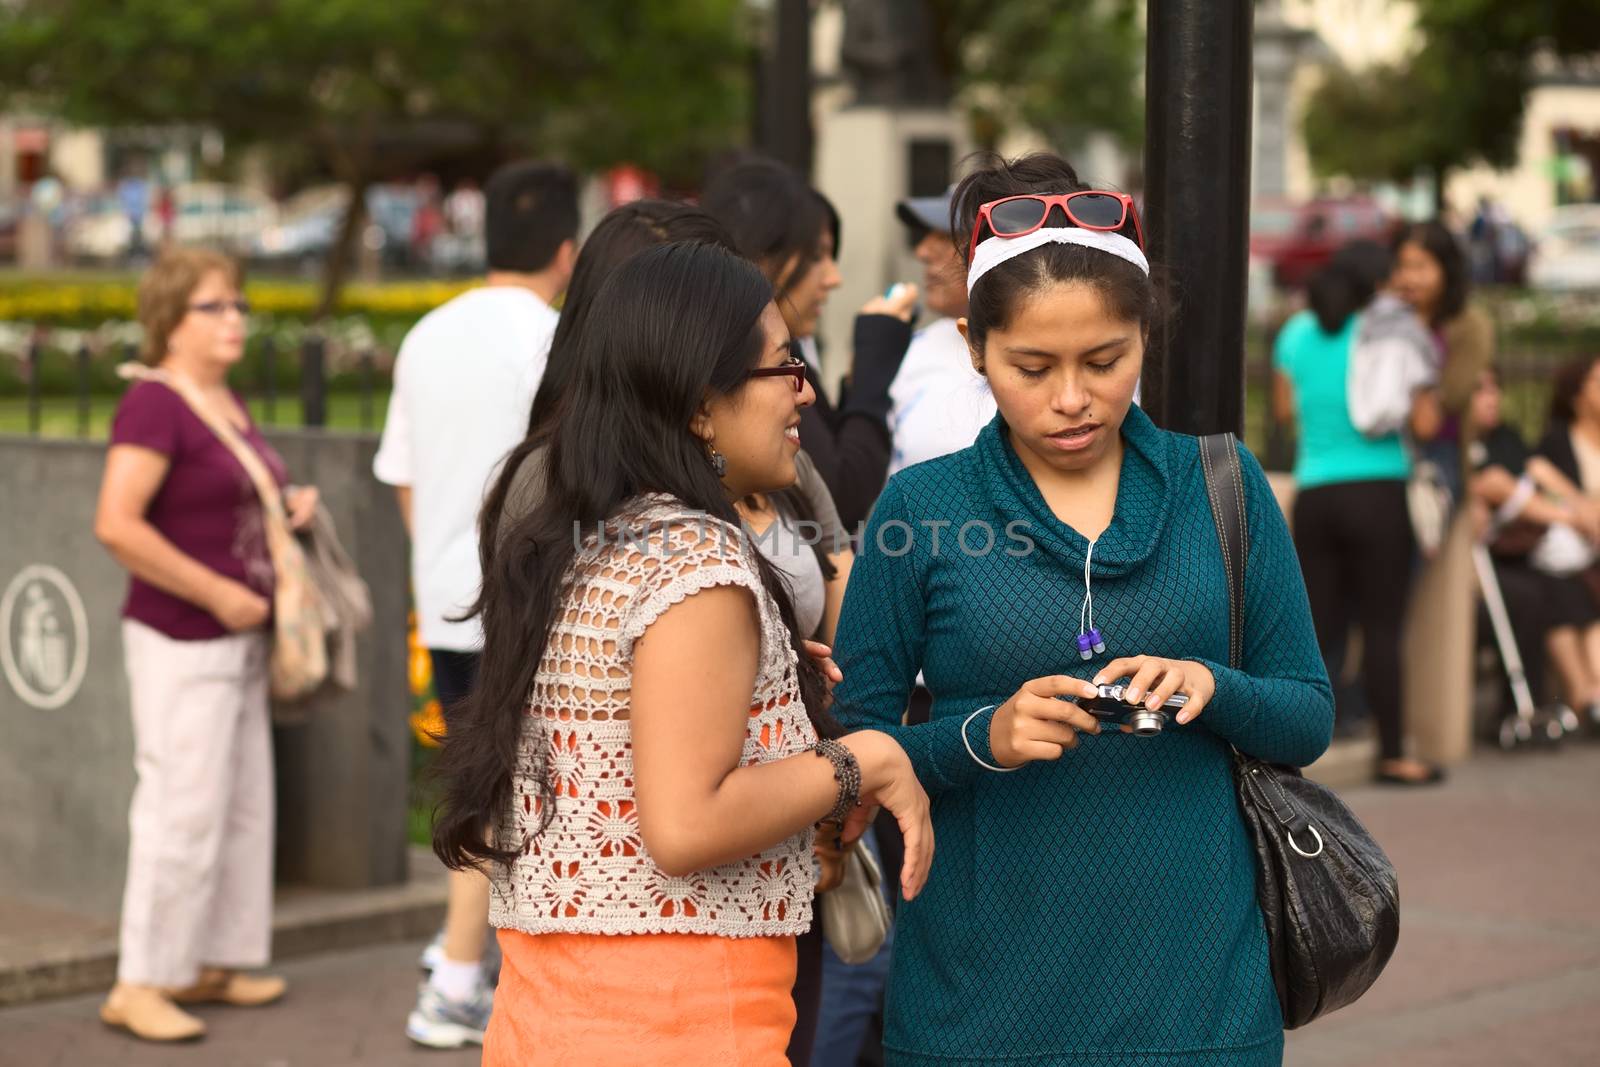 LIMA, PERU - MARCH 3, 2012: Unidentified youg woman looking at a camera on March 3, 2012 in Miraflores, Lima, Peru